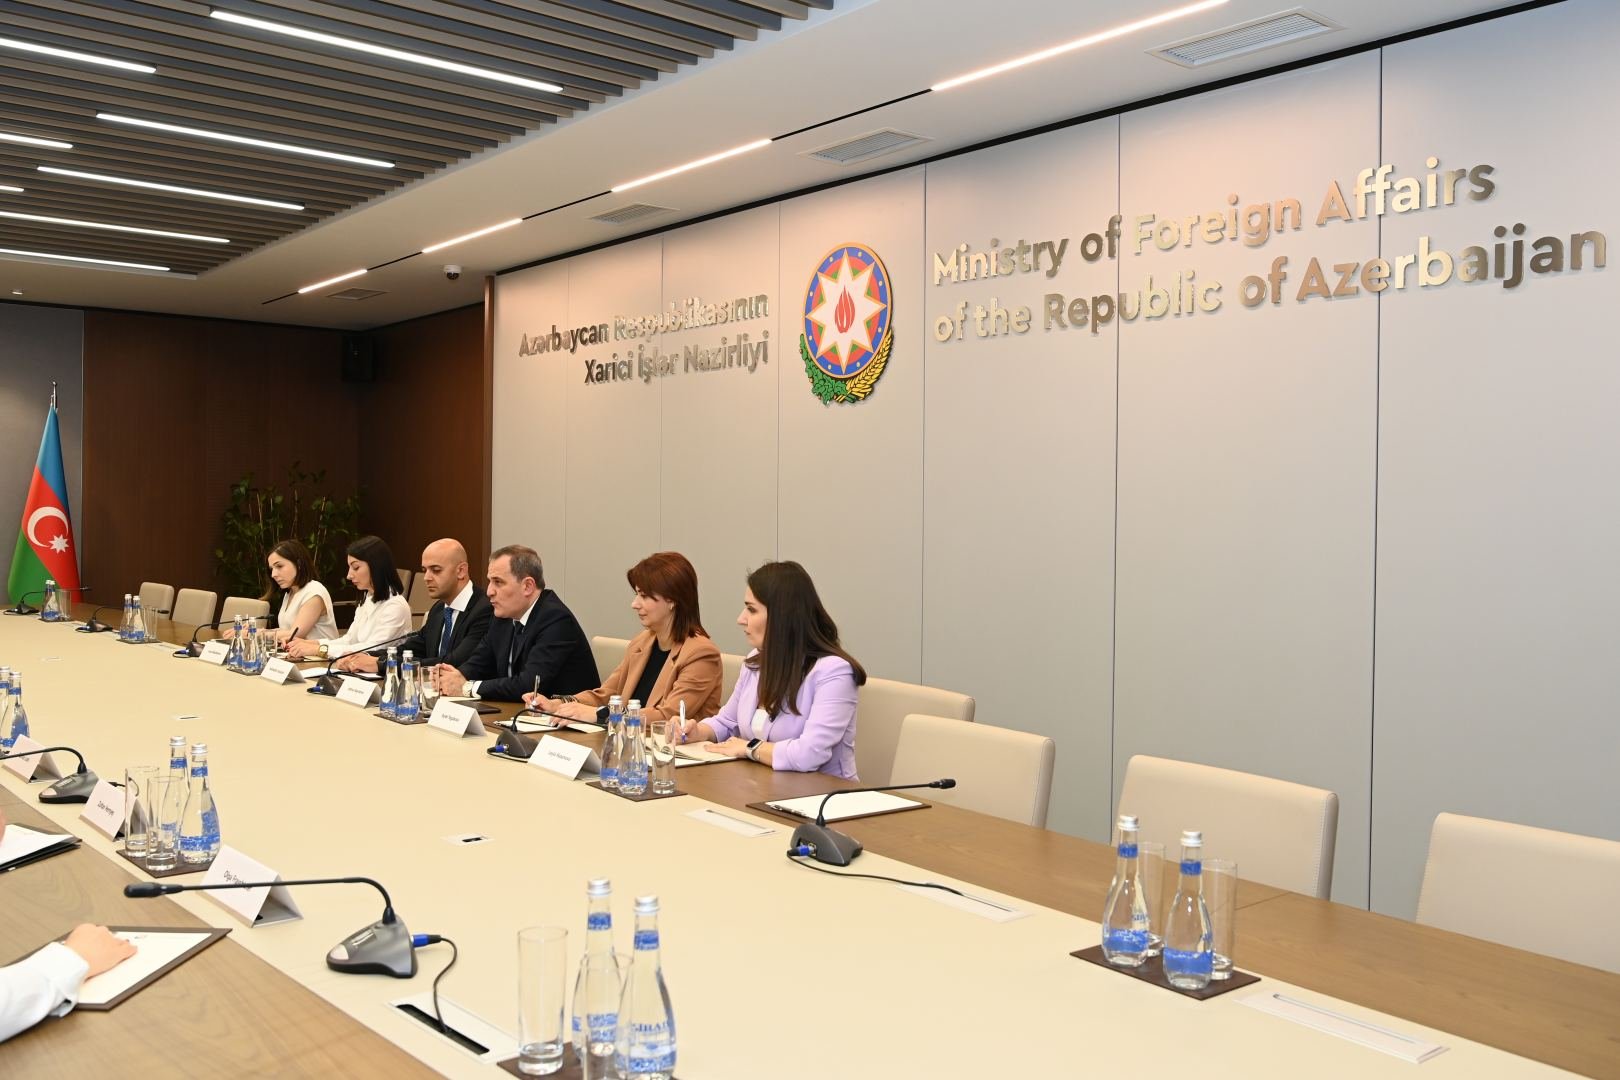 Azerbaijan's FM meets Chairman of GR-DEM Group of CoE Committee of Representatives (PHOTO)